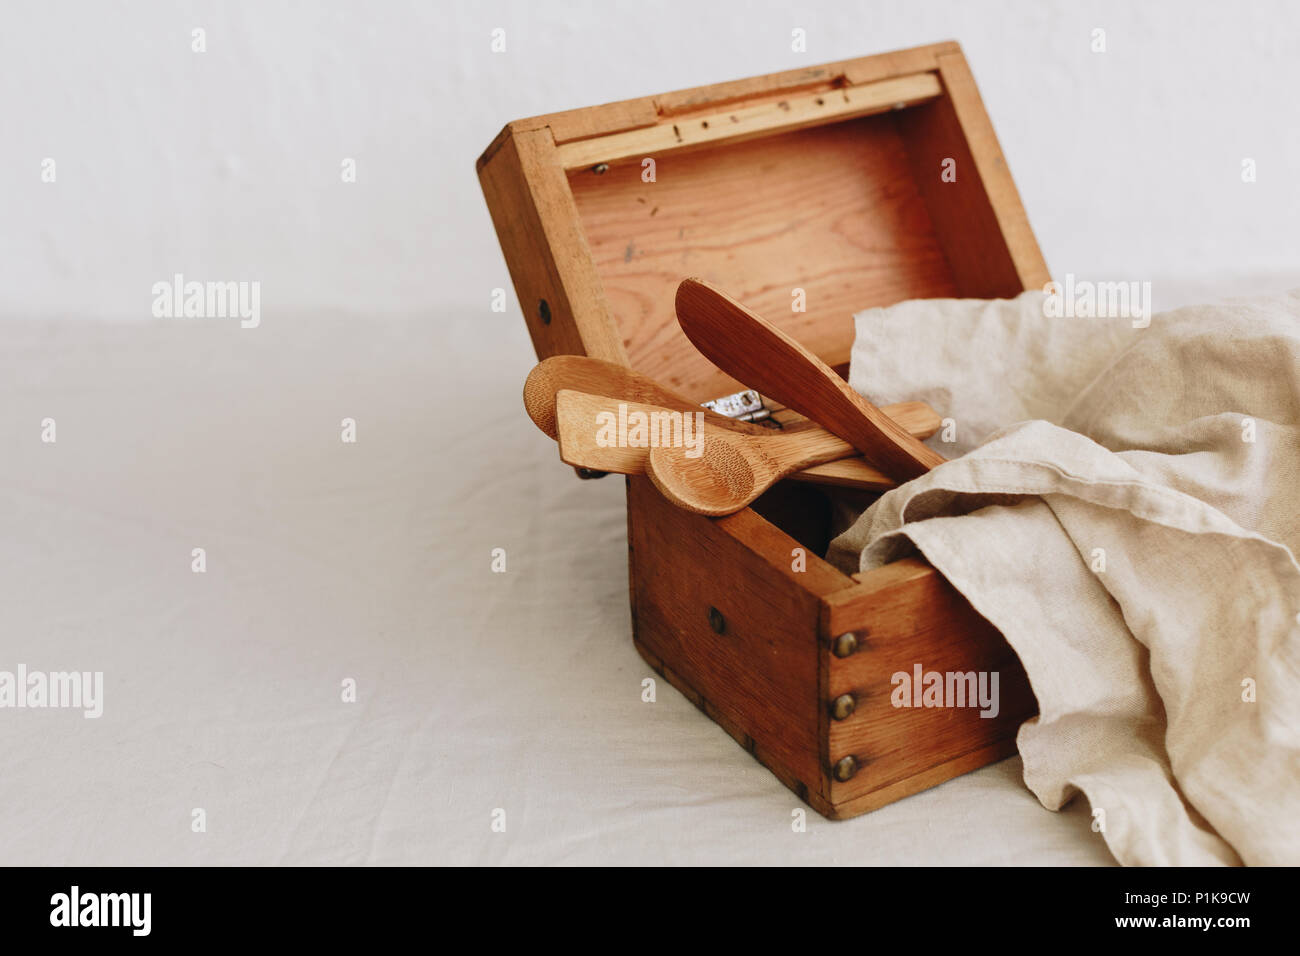 Wooden box with kitchen utensils and a linen napkin Stock Photo